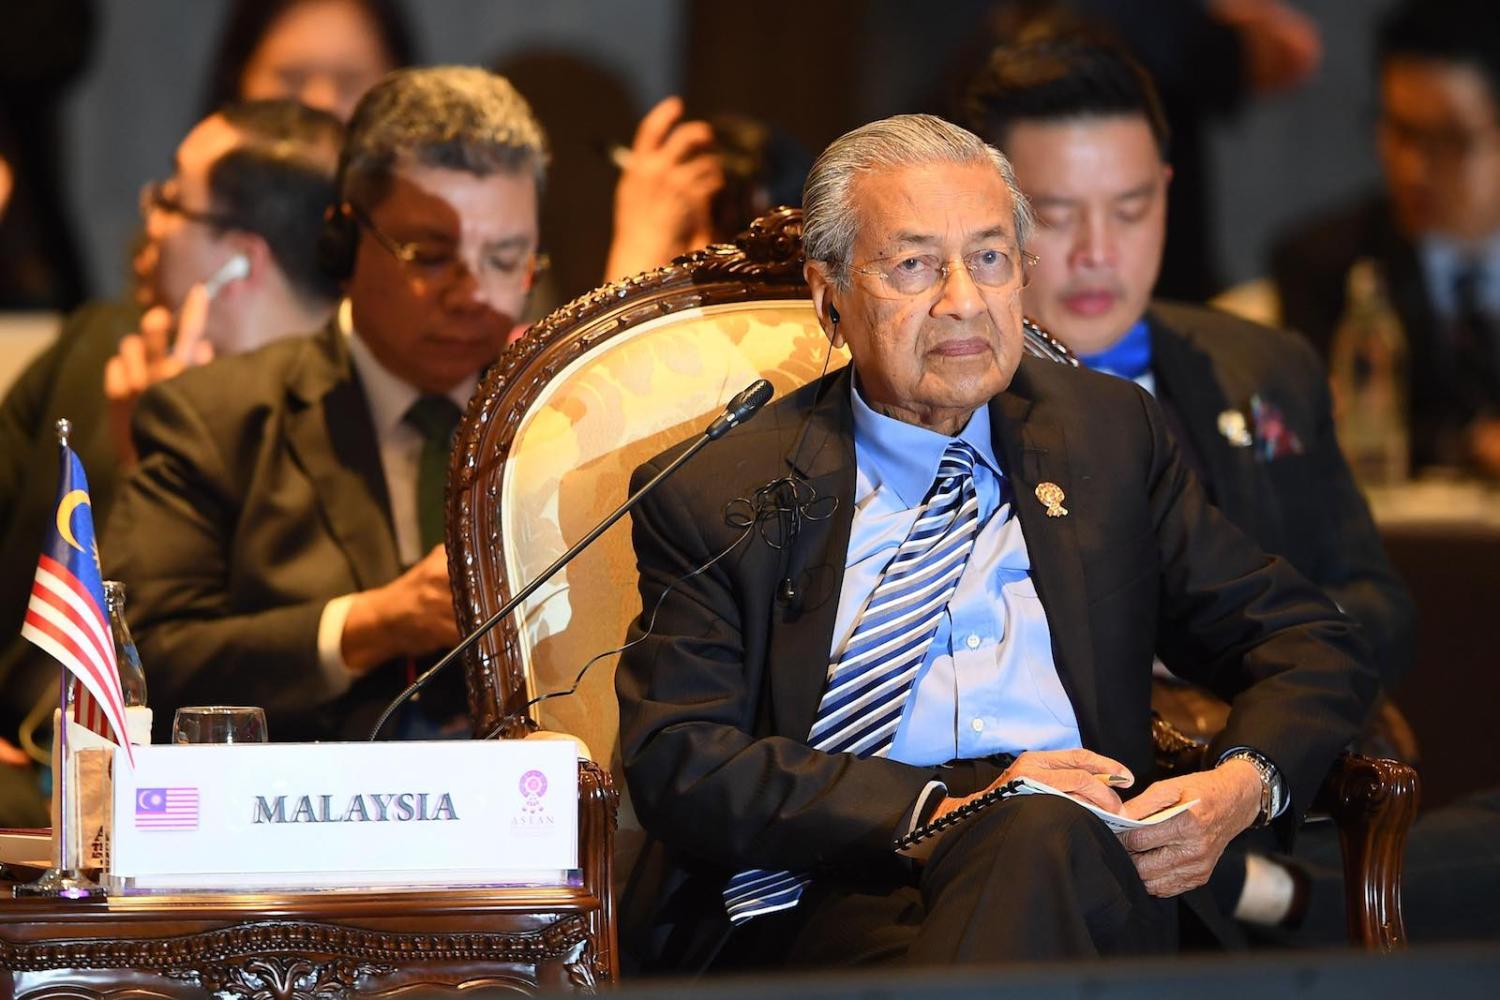 Malaysia’s Prime Minister Mahathir Mohamad this month at the East Asia Summit in Bangkok (Photo: Manan Vatsyayana/AFP/Getty Images)